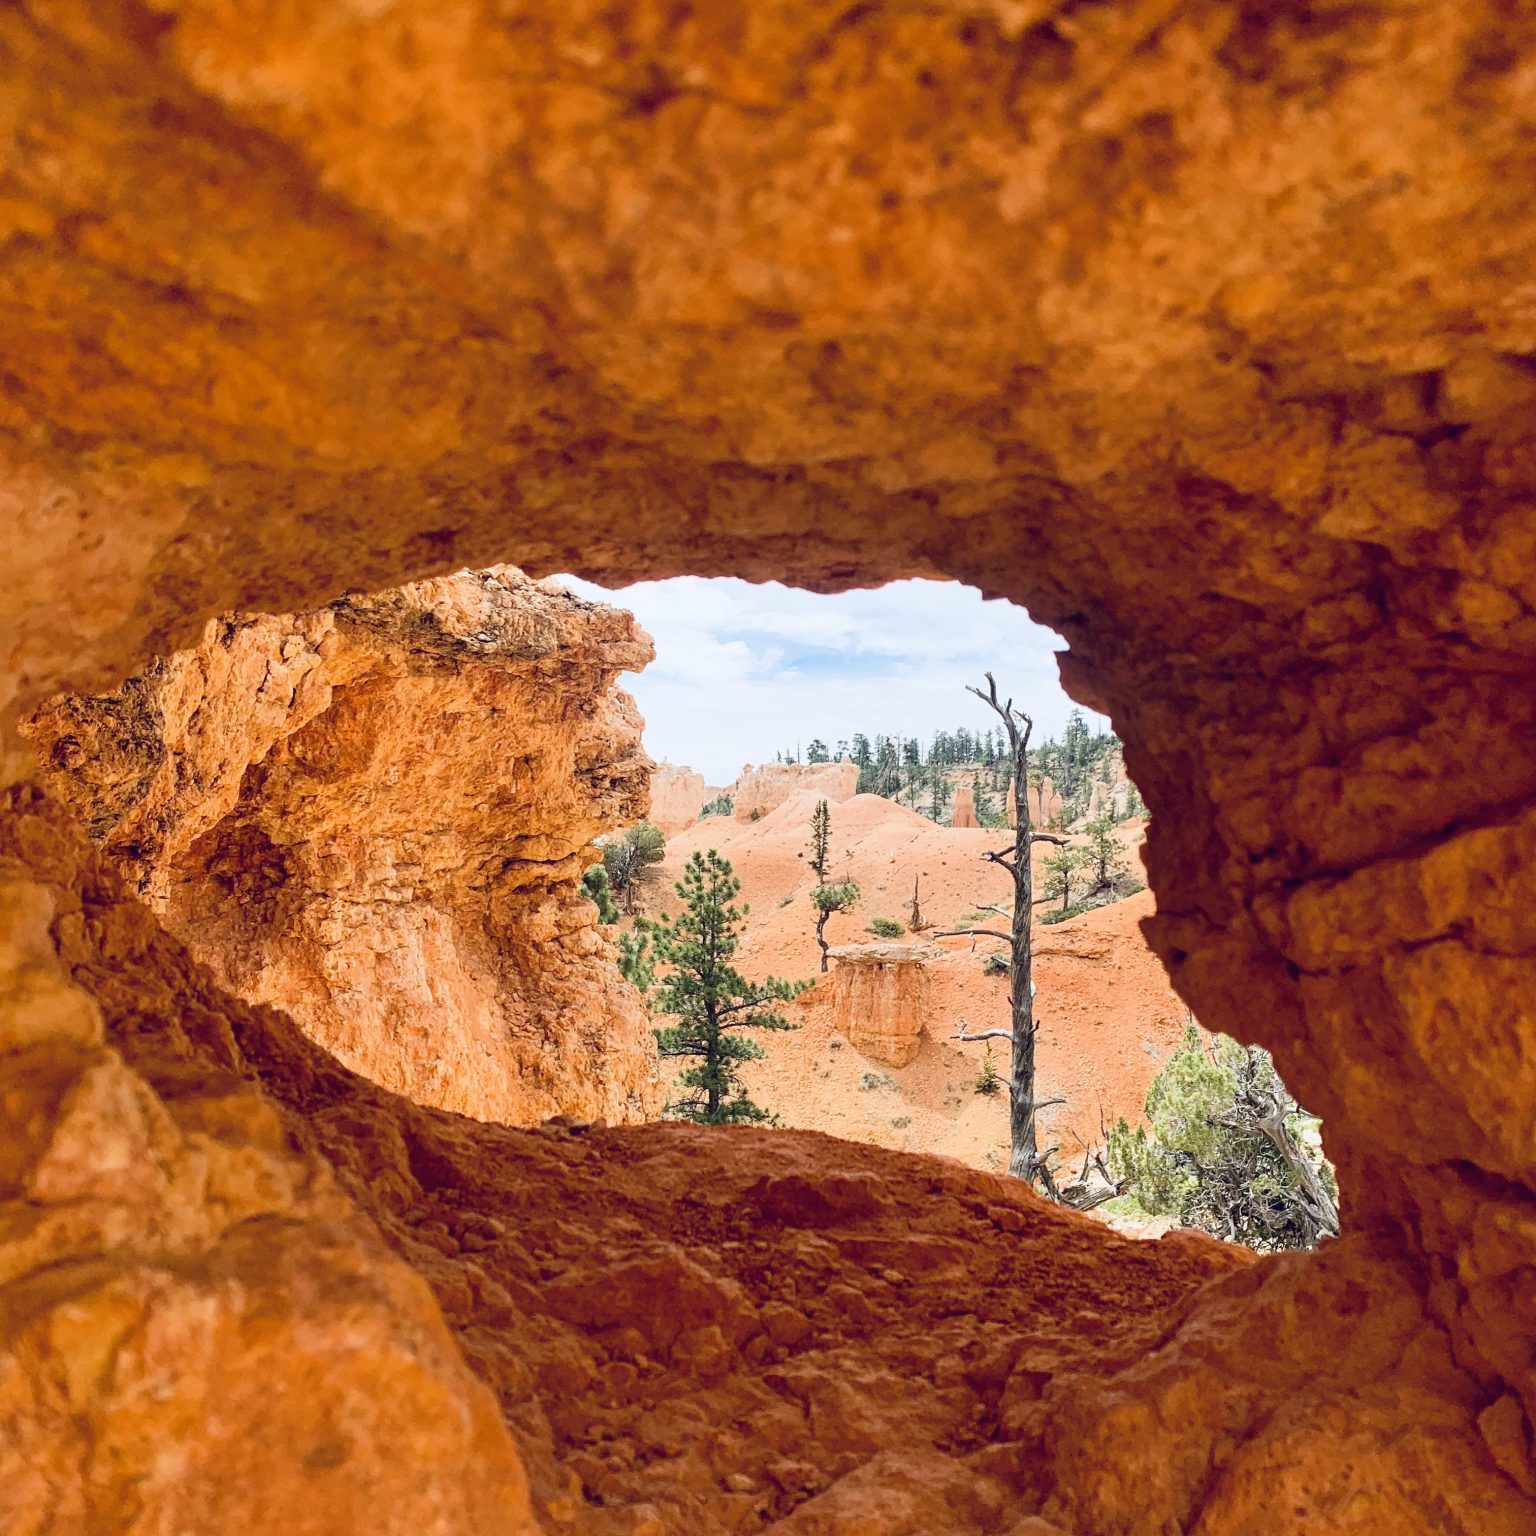 Looking through a large hole in red-orange rocks to a surreal, desert canyon landscape.